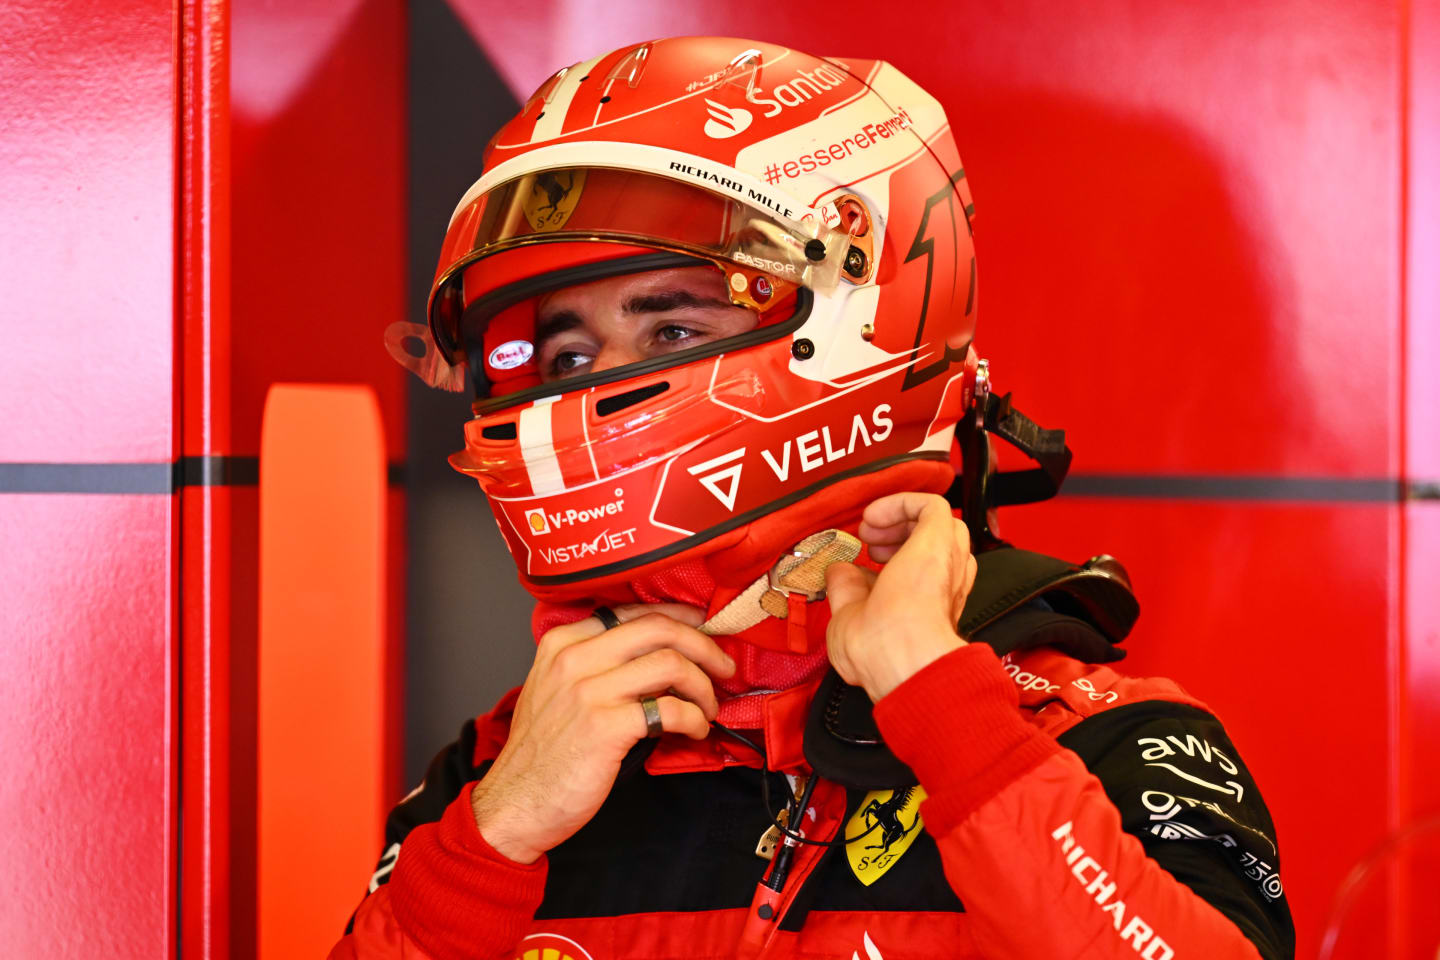 MELBOURNE, AUSTRALIA - APRIL 08: Charles Leclerc of Monaco and Ferrari prepares to drive in the garage during practice ahead of the F1 Grand Prix of Australia at Melbourne Grand Prix Circuit on April 08, 2022 in Melbourne, Australia. (Photo by Clive Mason/Getty Images)